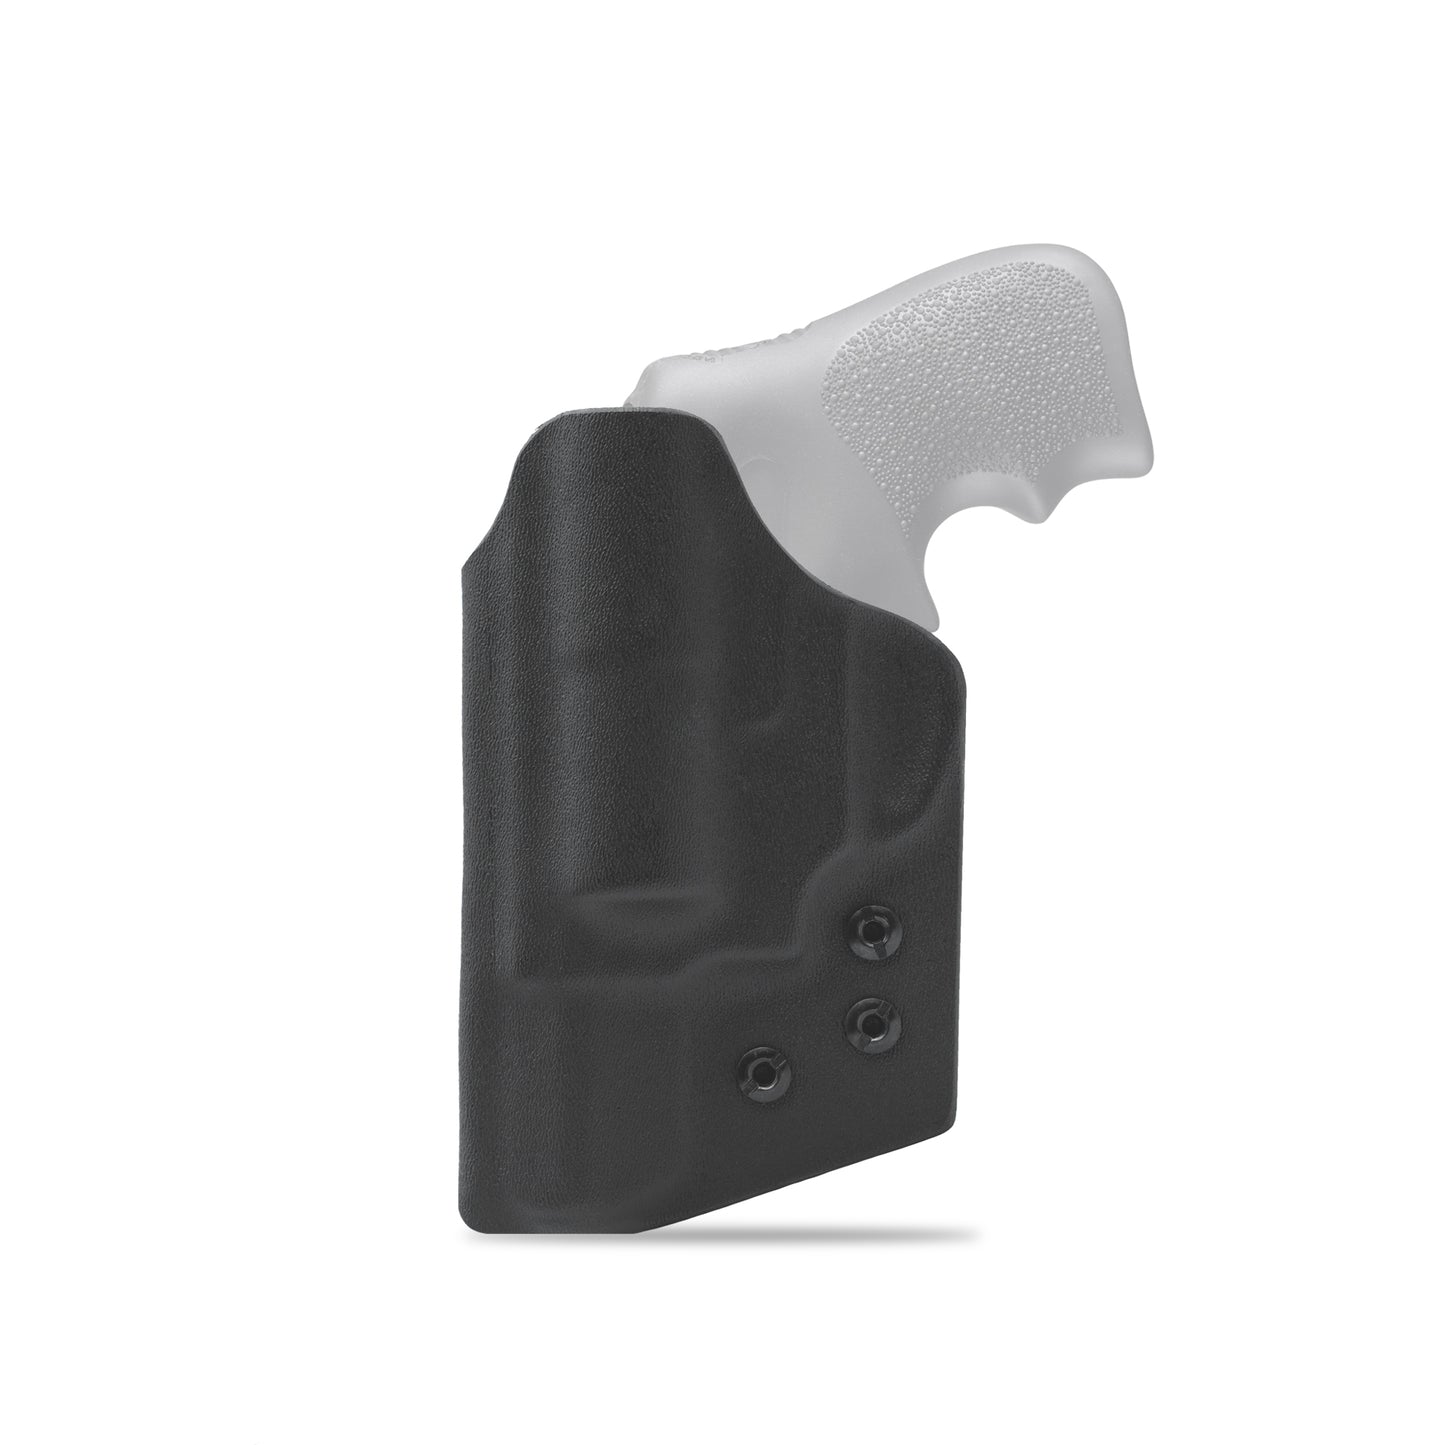 IWB Holster for the Ruger LCR .38 2"